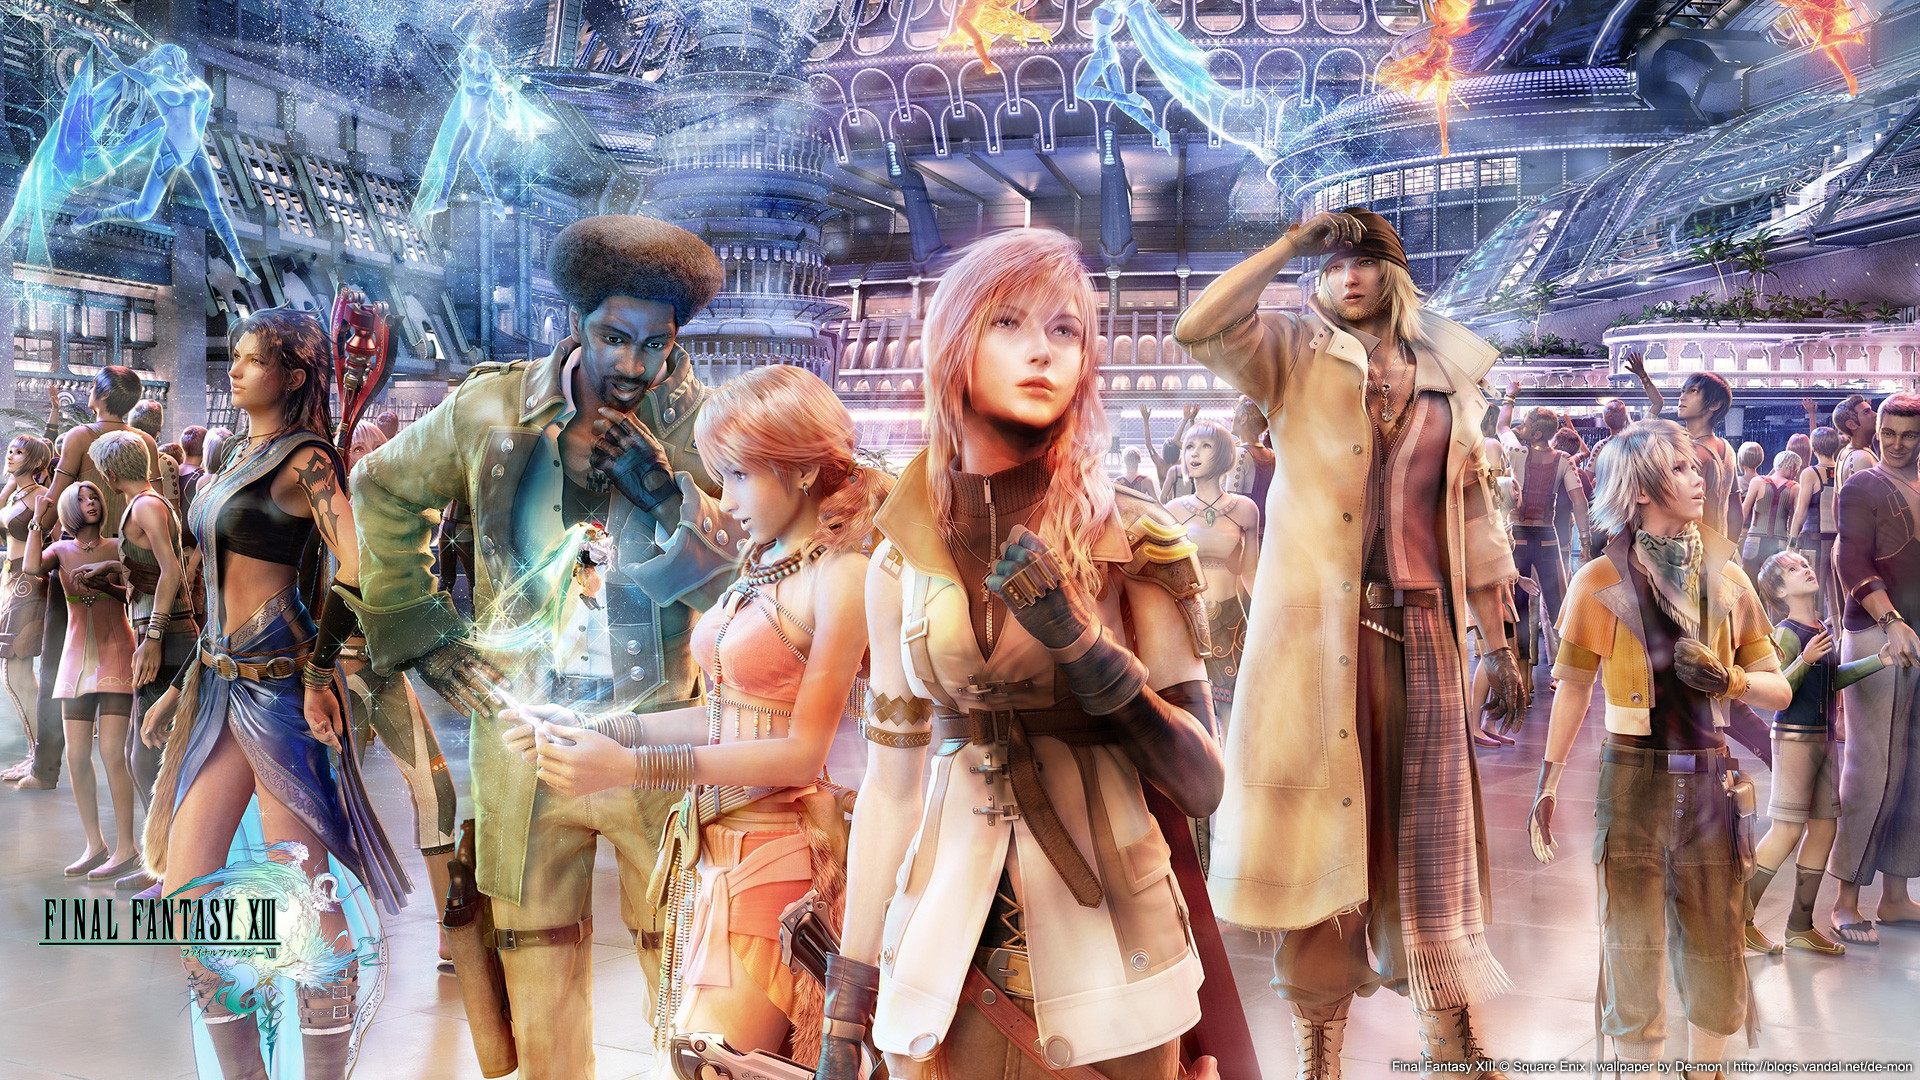 Final Fantasy Xiii HD Wallpapers | Backgrounds